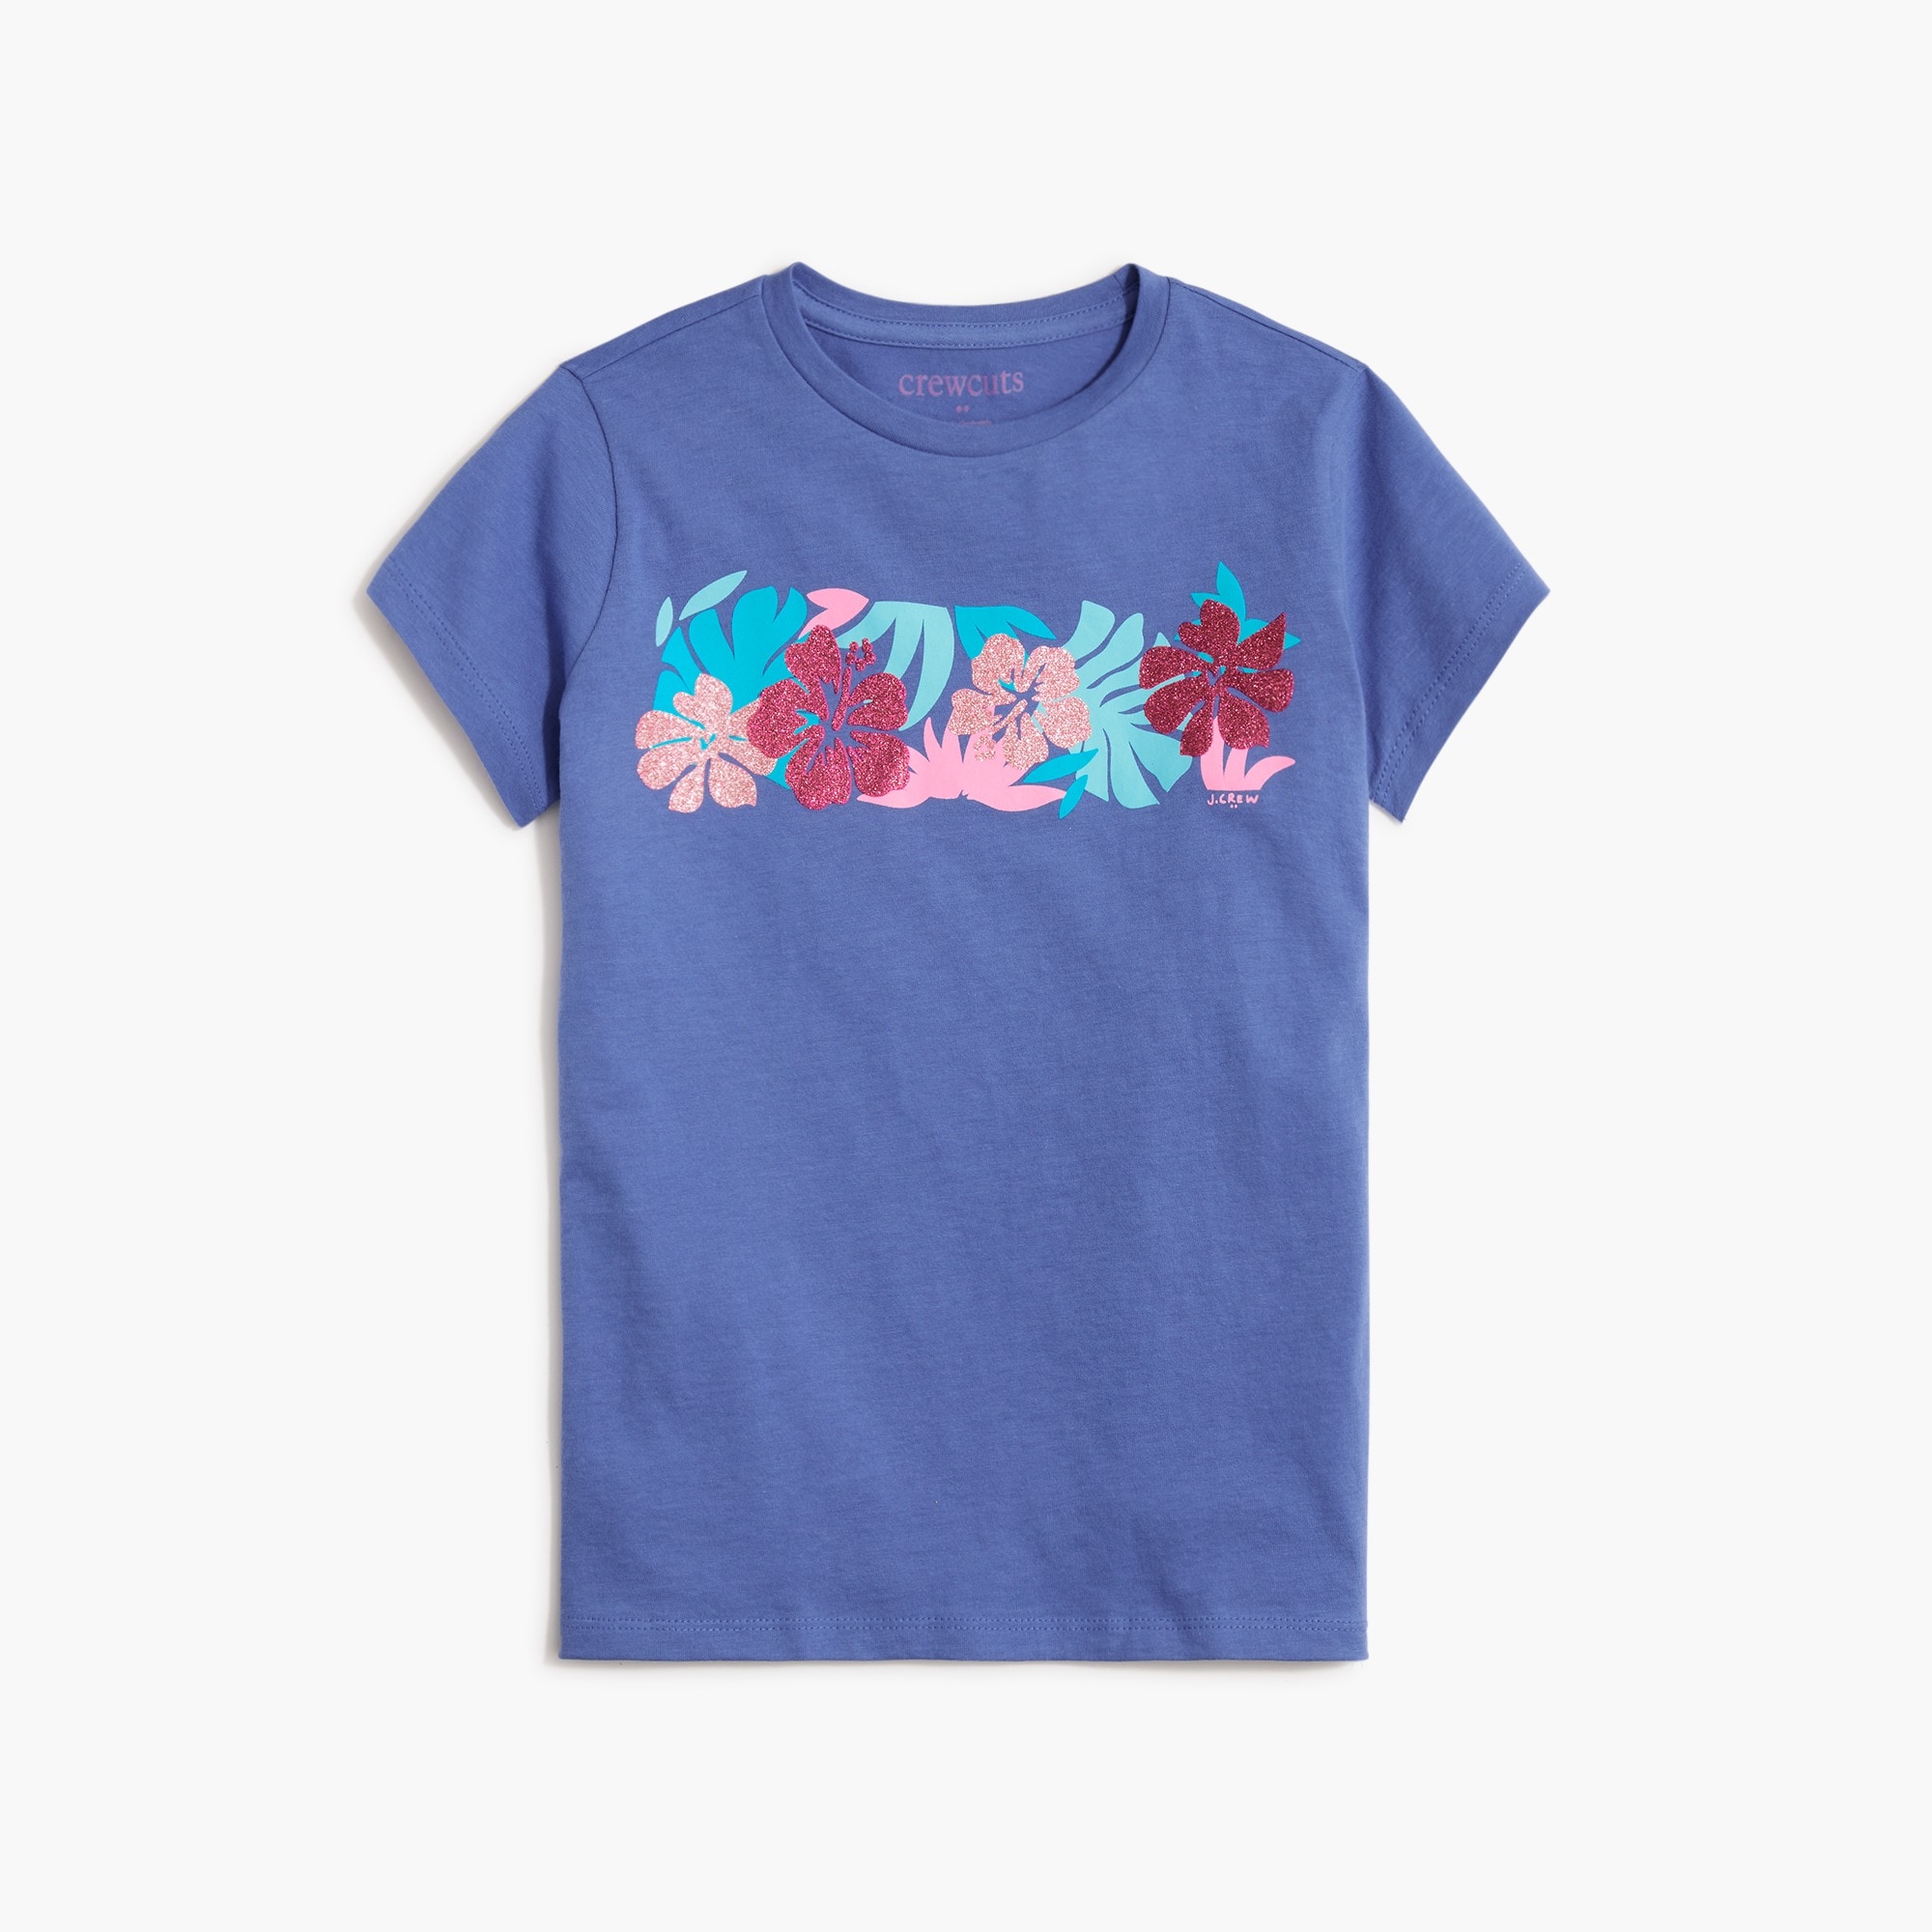  Girls' tropical flowers graphic tee